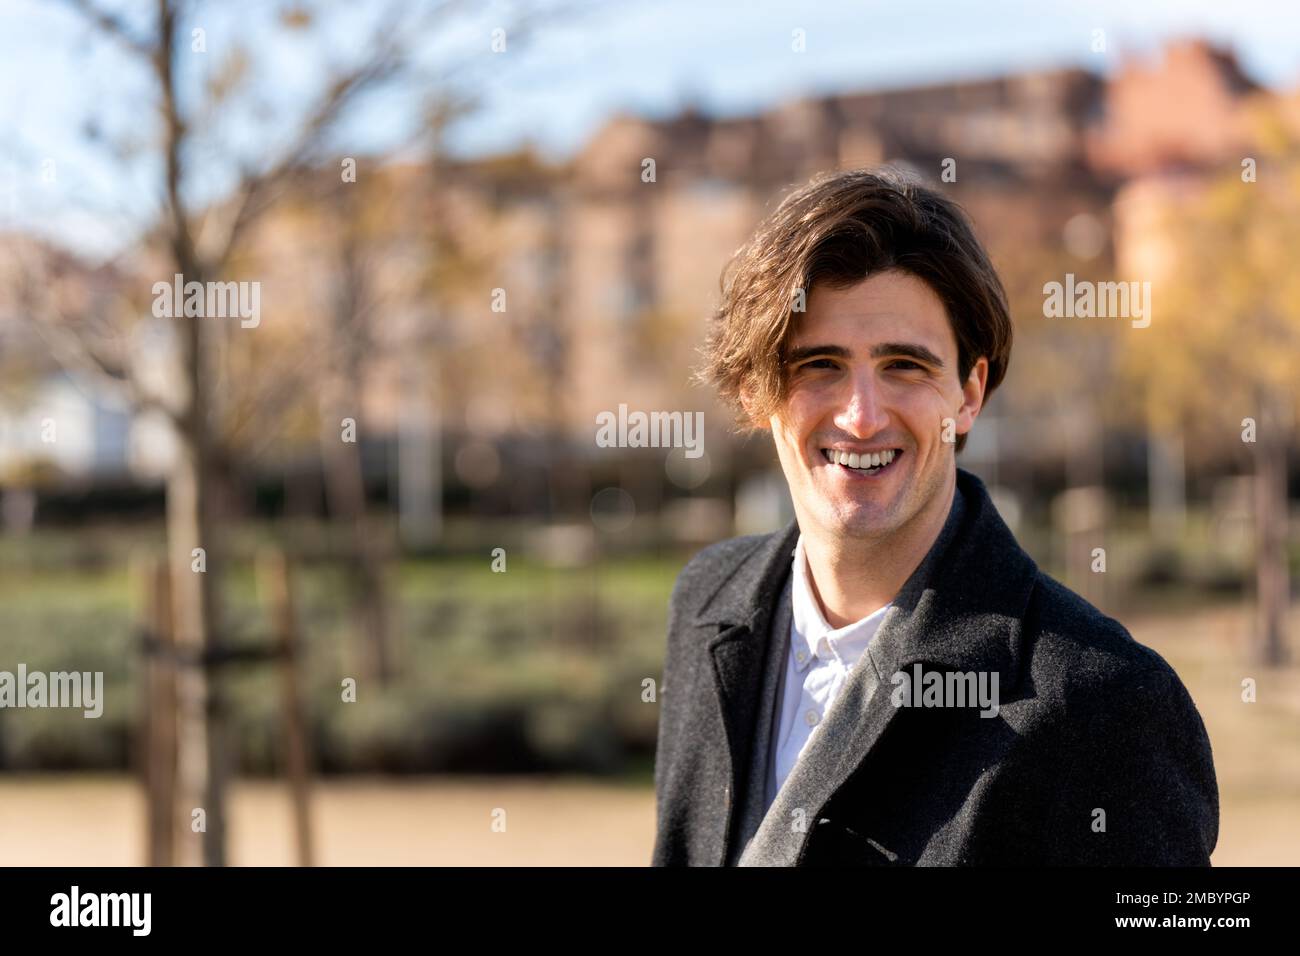 Cheerful young businessman in classy outfit smiling and looking at camera while spending time in park Stock Photo